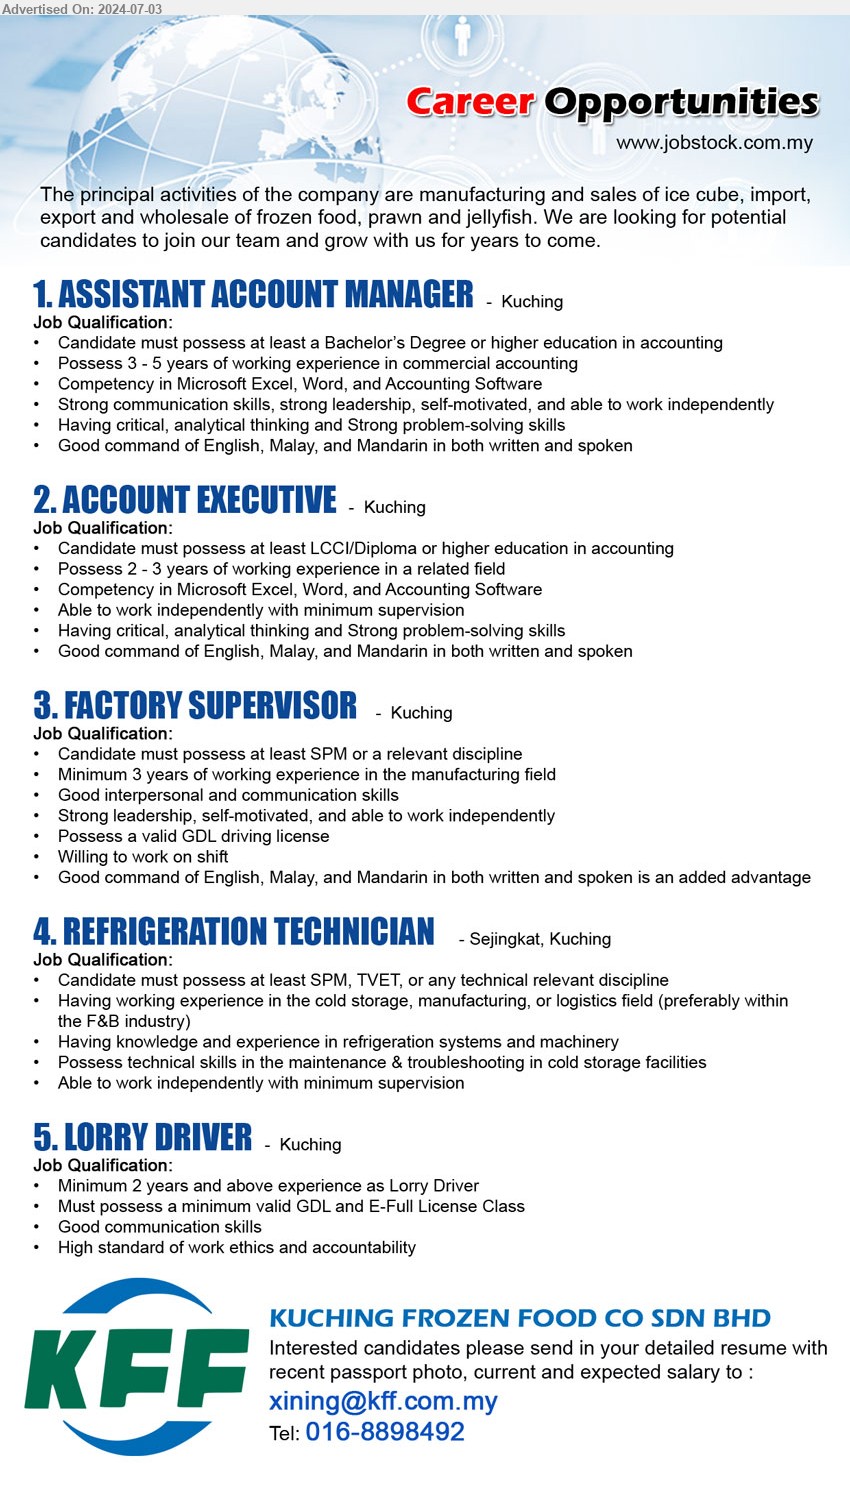 KUCHING FROZEN FOOD CO SDN BHD - 1. ASSISTANT ACCOUNT MANAGER (Kuching), Bachelor’s Degree or higher education in accounting, Possess 3 - 5 years of working experience in commercial accounting,...
2. ACCOUNT EXECUTIVE (Kuching), LCCI/Diploma or higher education in accounting, Possess 2 - 3 years of working experience i,...
3. FACTORY SUPERVISOR (Kuching),  SPM or a relevant discipline, Minimum 3 years of working experience in the manufacturing field,...
4. REFRIGERATION TECHNICIAN  (Kuching),  SPM, TVET, or any technical relevant discipline, Having working experience in the cold storage, manufacturing, or logistics field ,...
5. LORRY DRIVER (Kuching), Must possess a minimum valid GDL and E-Full License Class,...
Call 016-8898492 / Email resume to ...
